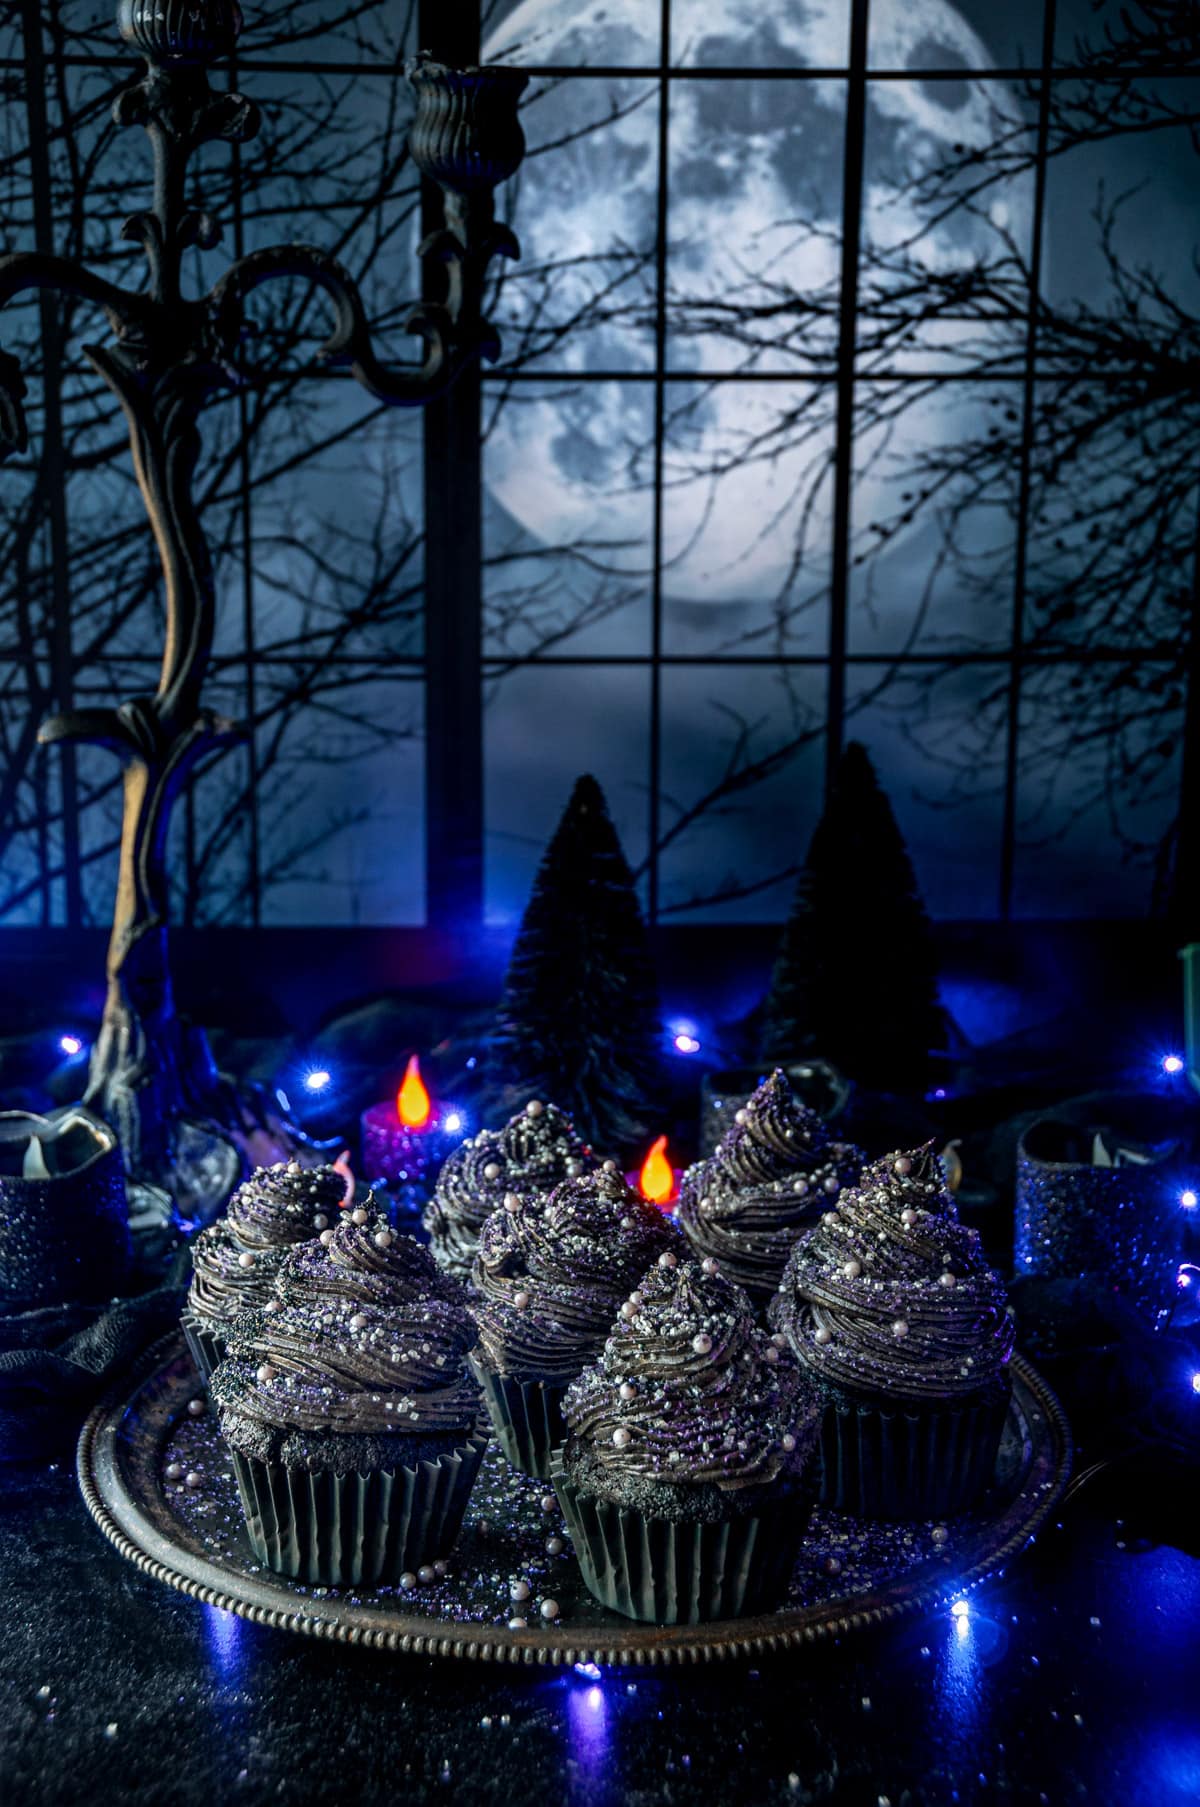 Black velvet cupcakes topped with sanding sugar and sprinkles on gray metal plate with purple lights, candles, and eerie forest window moonscape in background